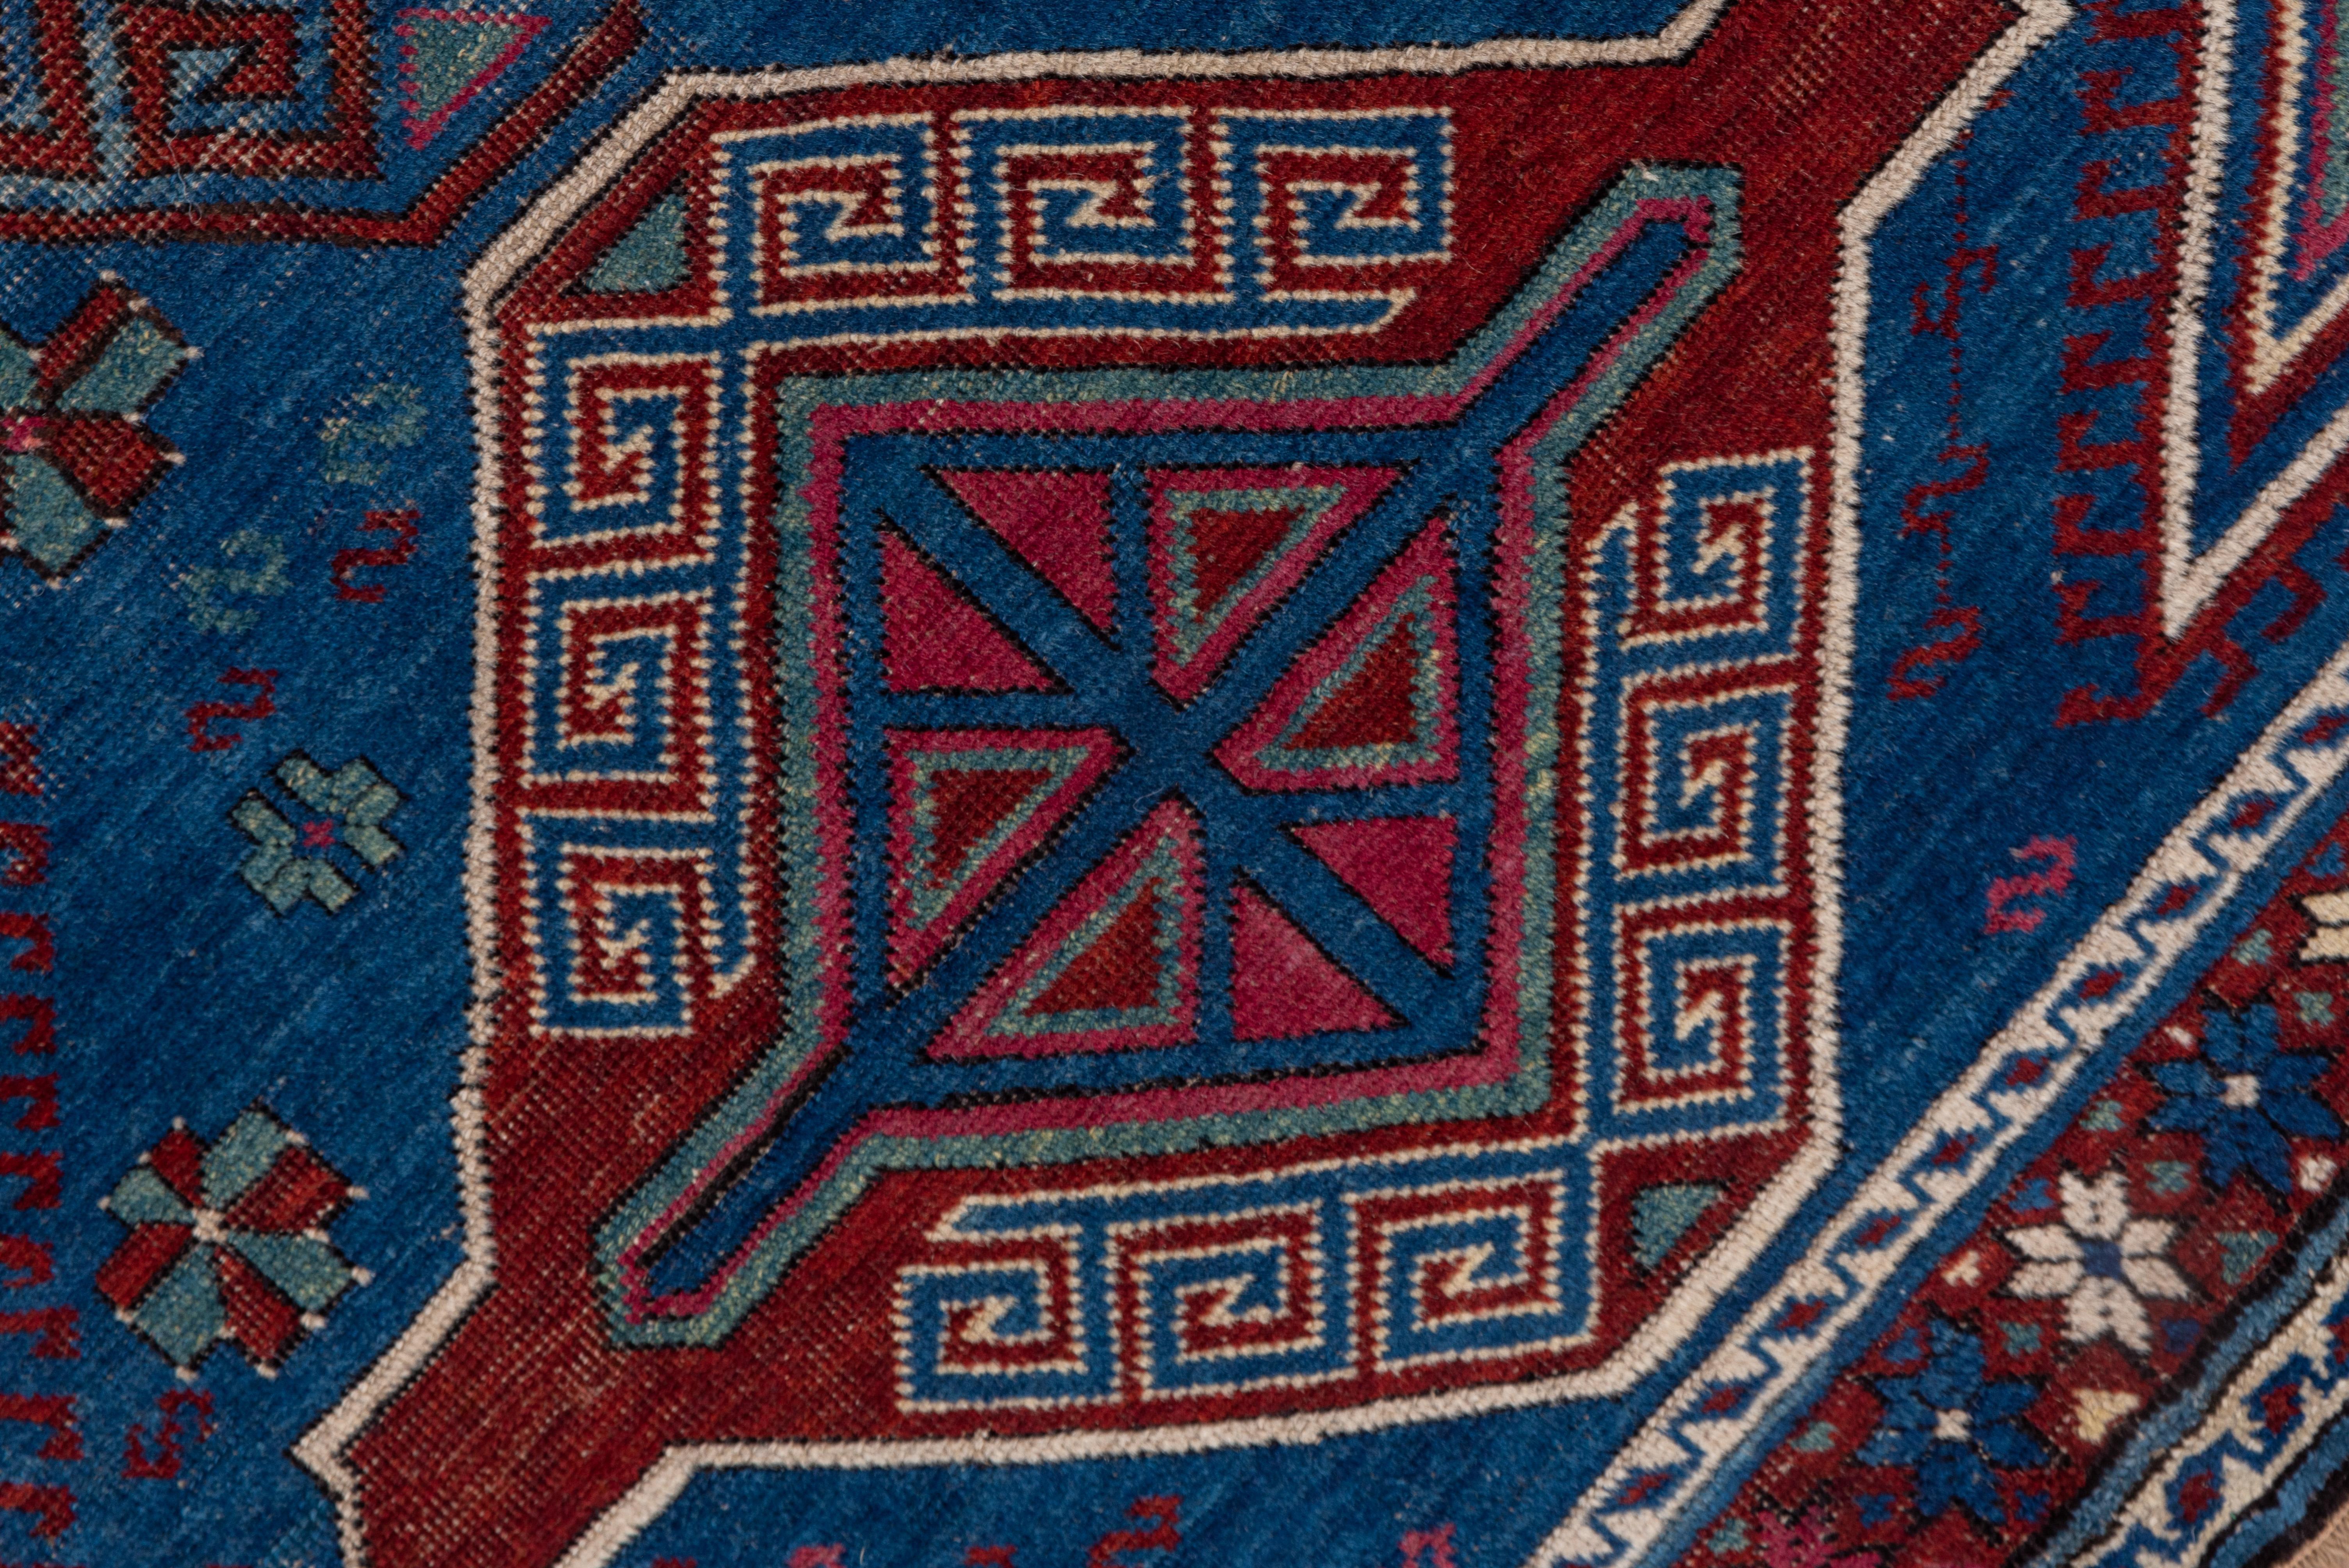 Hand-Knotted Antique Caucasian Kuba Area Rug, Dark Blue Field, Red Borders, Pink Accents For Sale